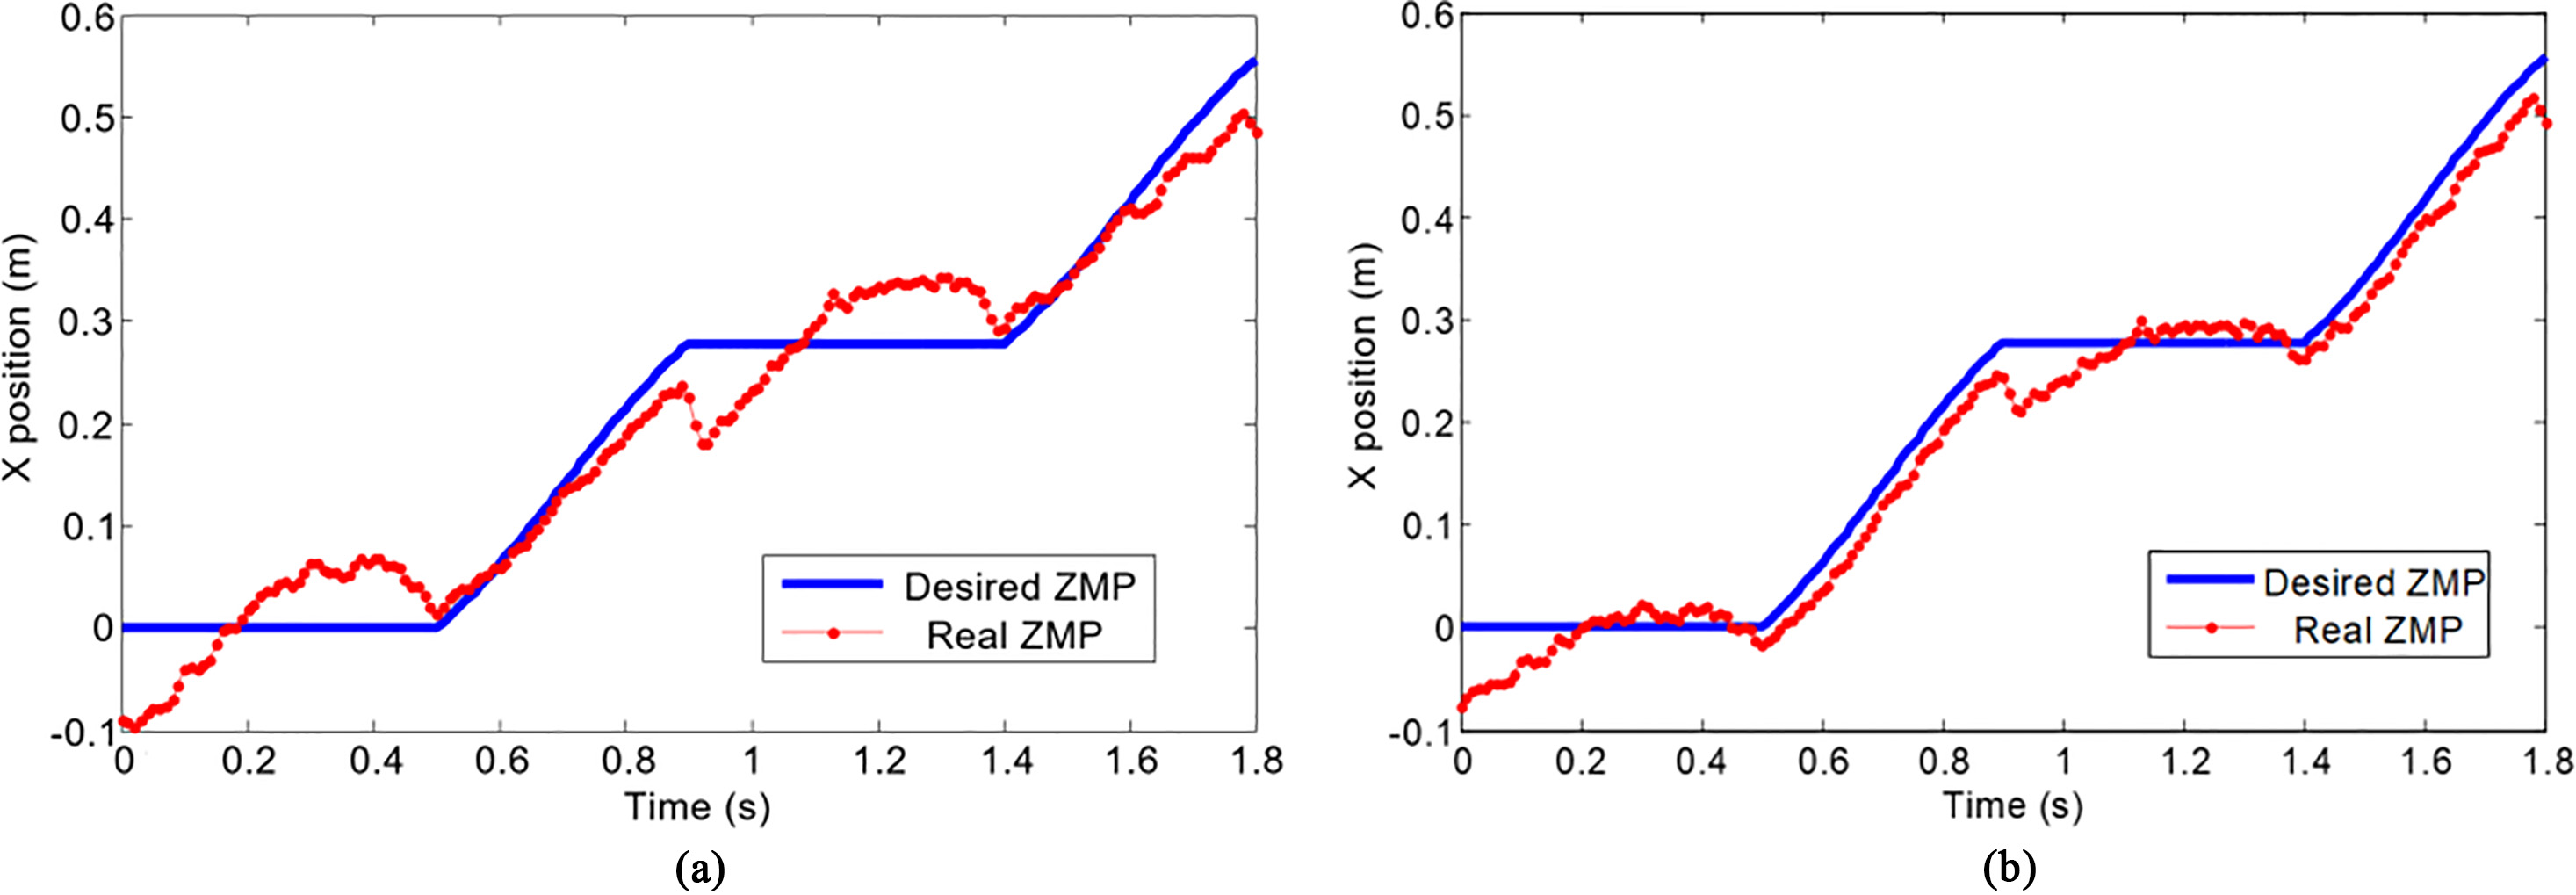 Desired and real ZMP trajectories. (a) Trajectories of biped robot with rigid ankle joint. (b) Trajectories of biped robot with variable ankle joint.